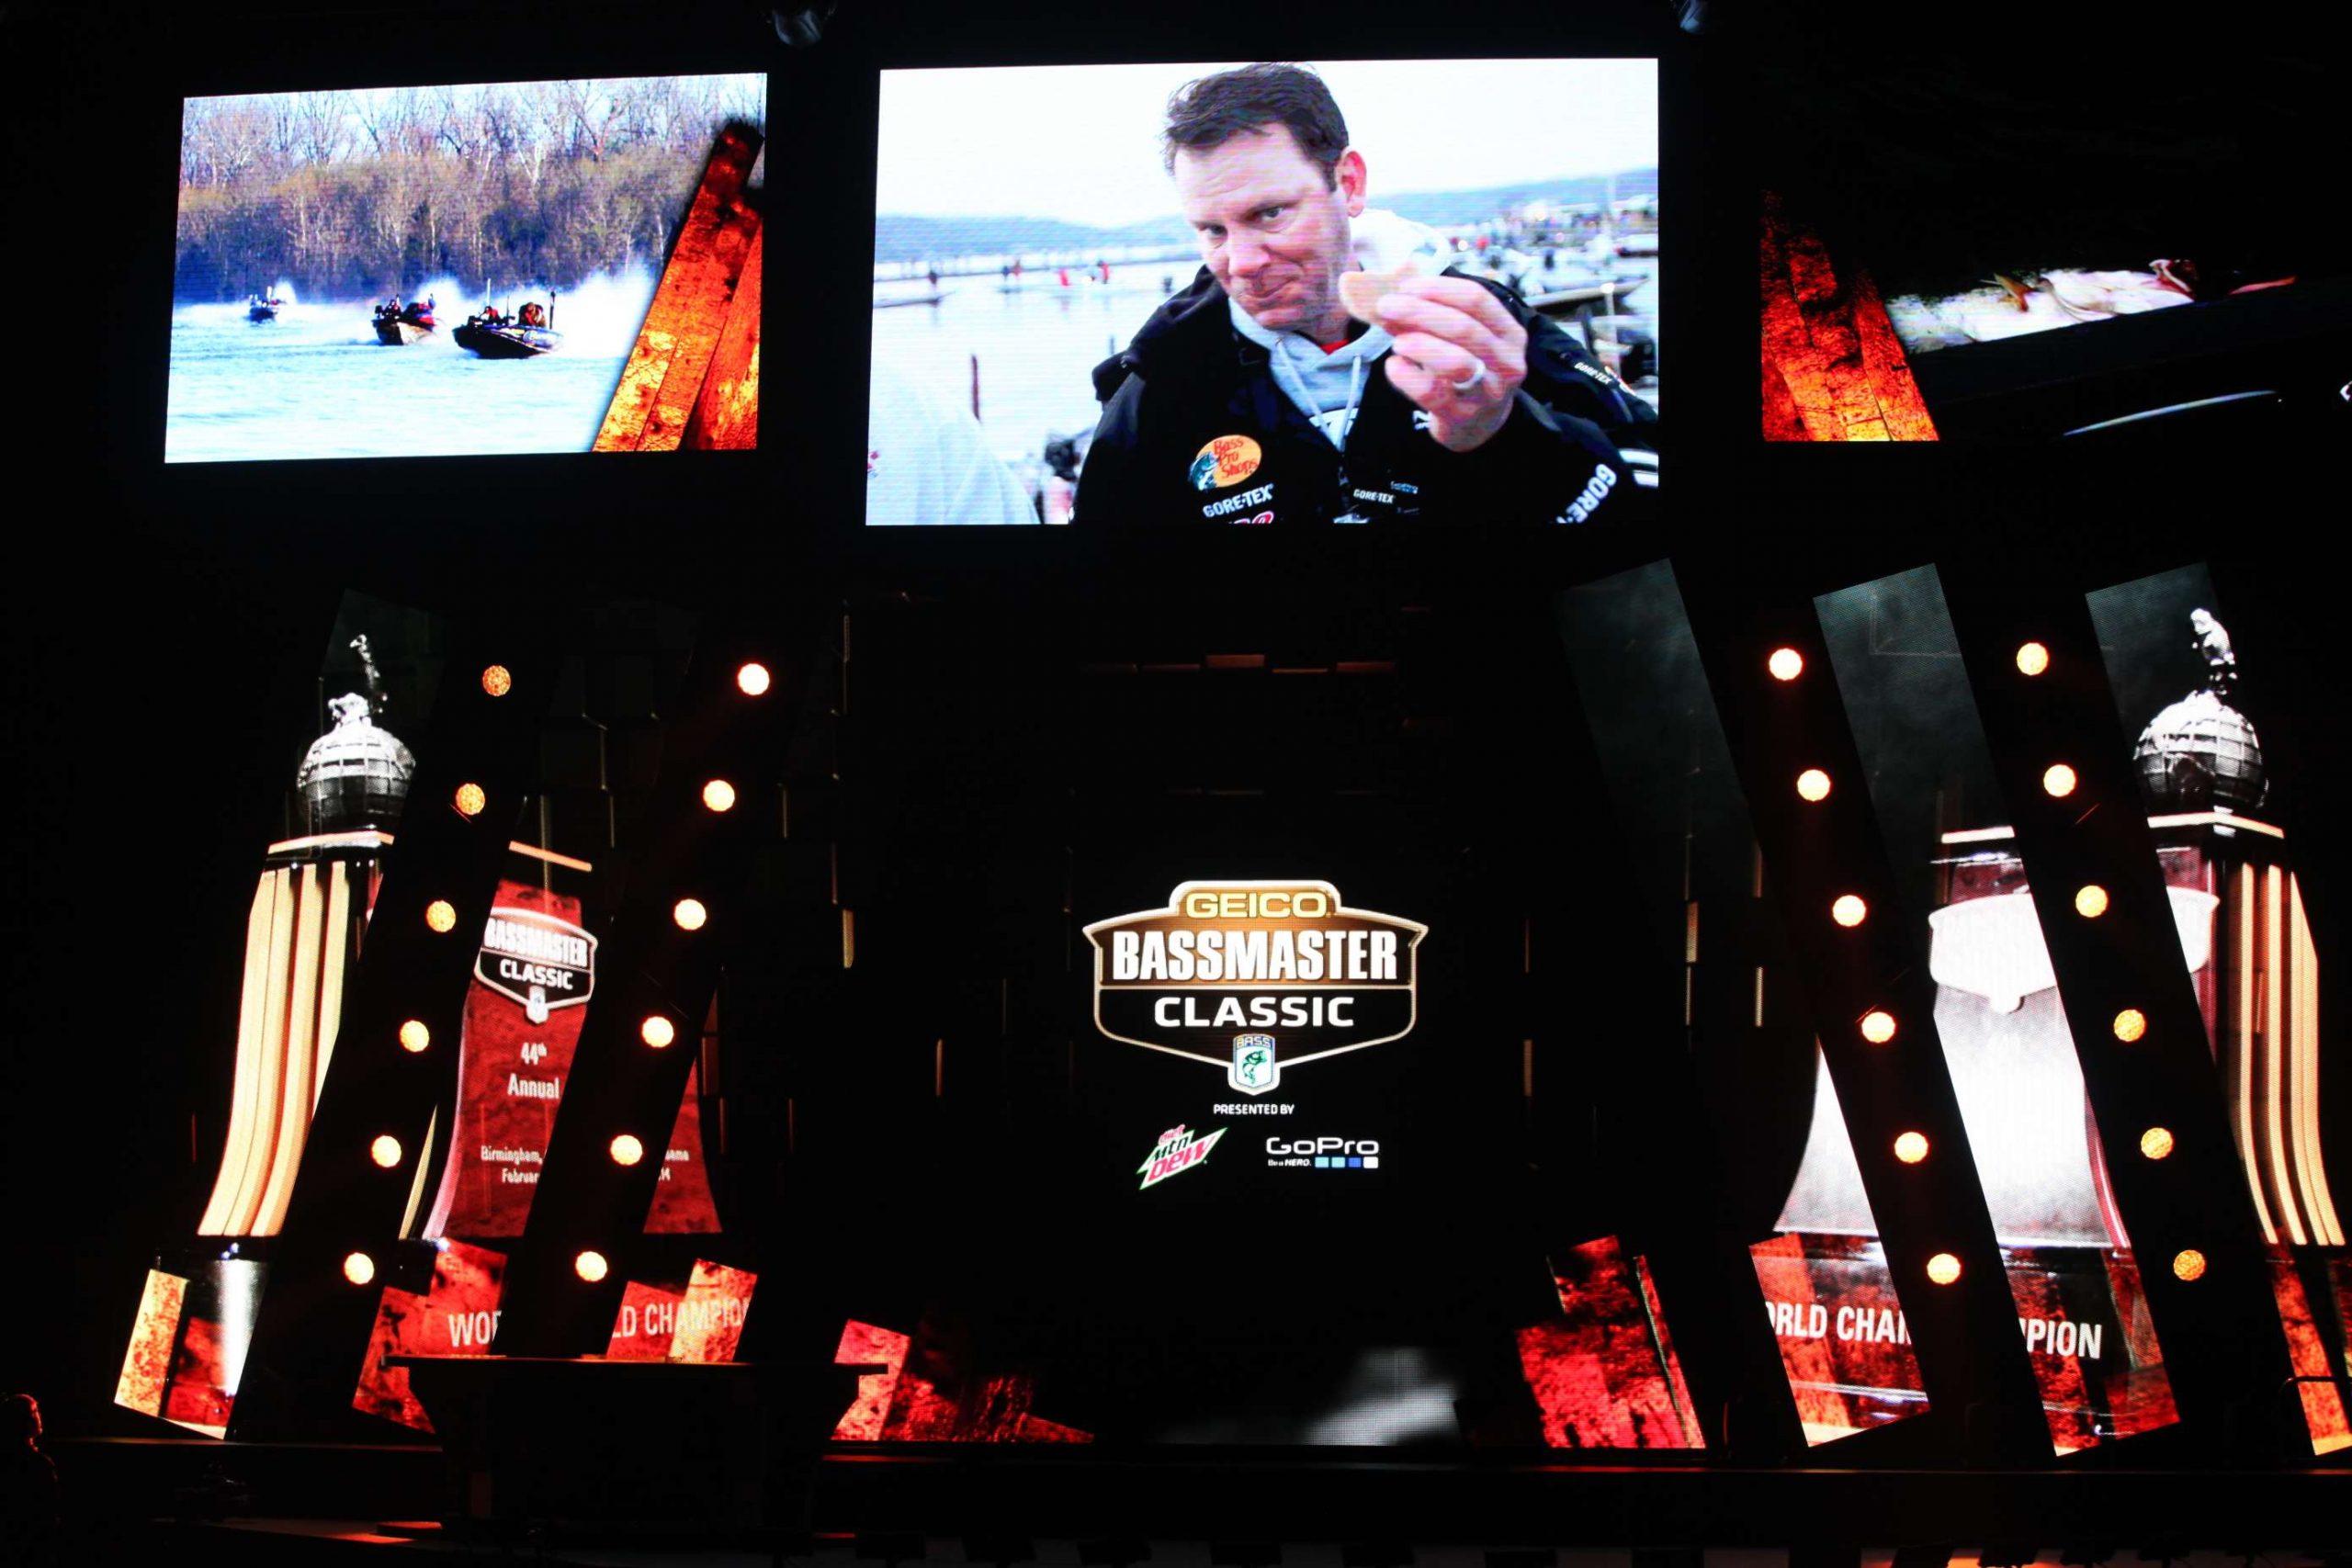 The stage is set for the final weigh-in of the 2014 GEICO Bassmaster Classic presented by Diet Mountain Dew and GoPro.